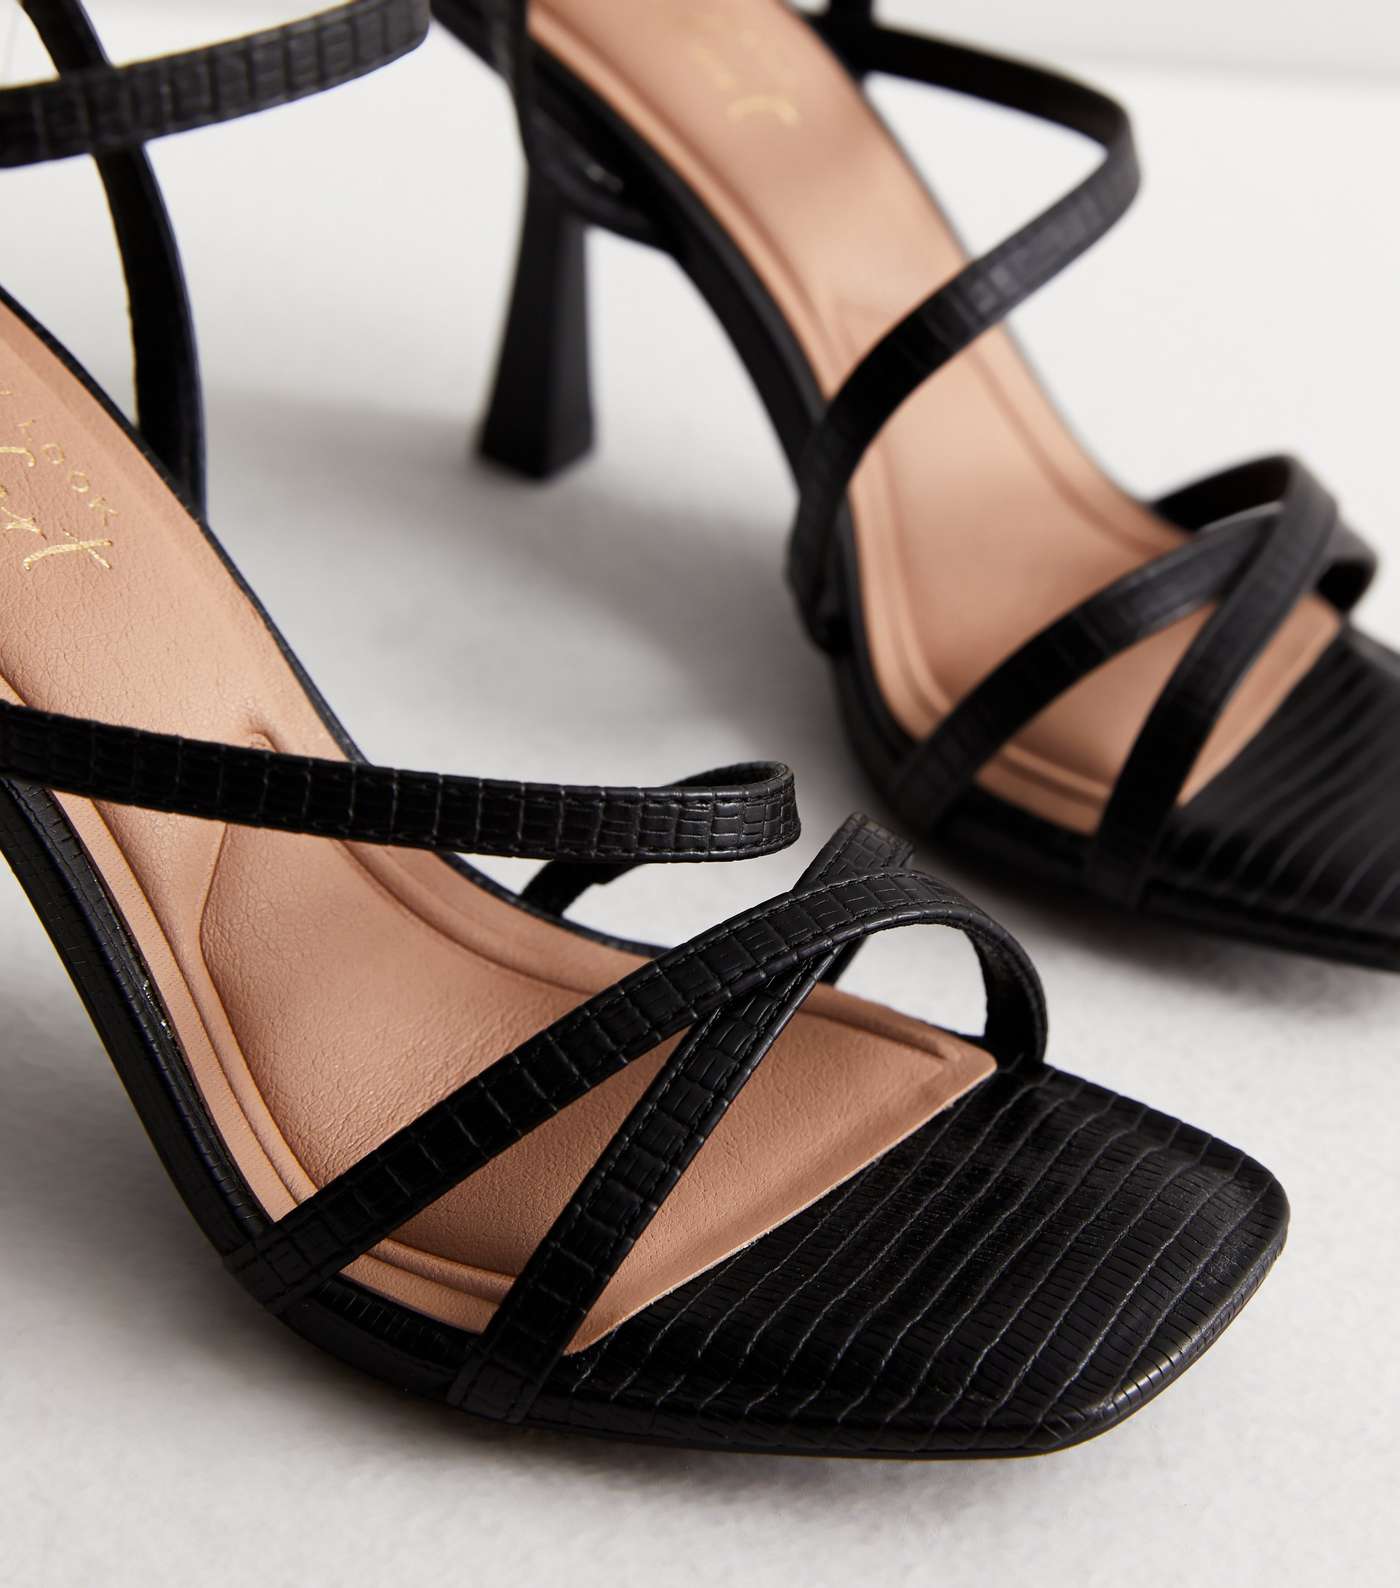 Black Leather-Look Strappy Stiletto Heel Sandals Image 3